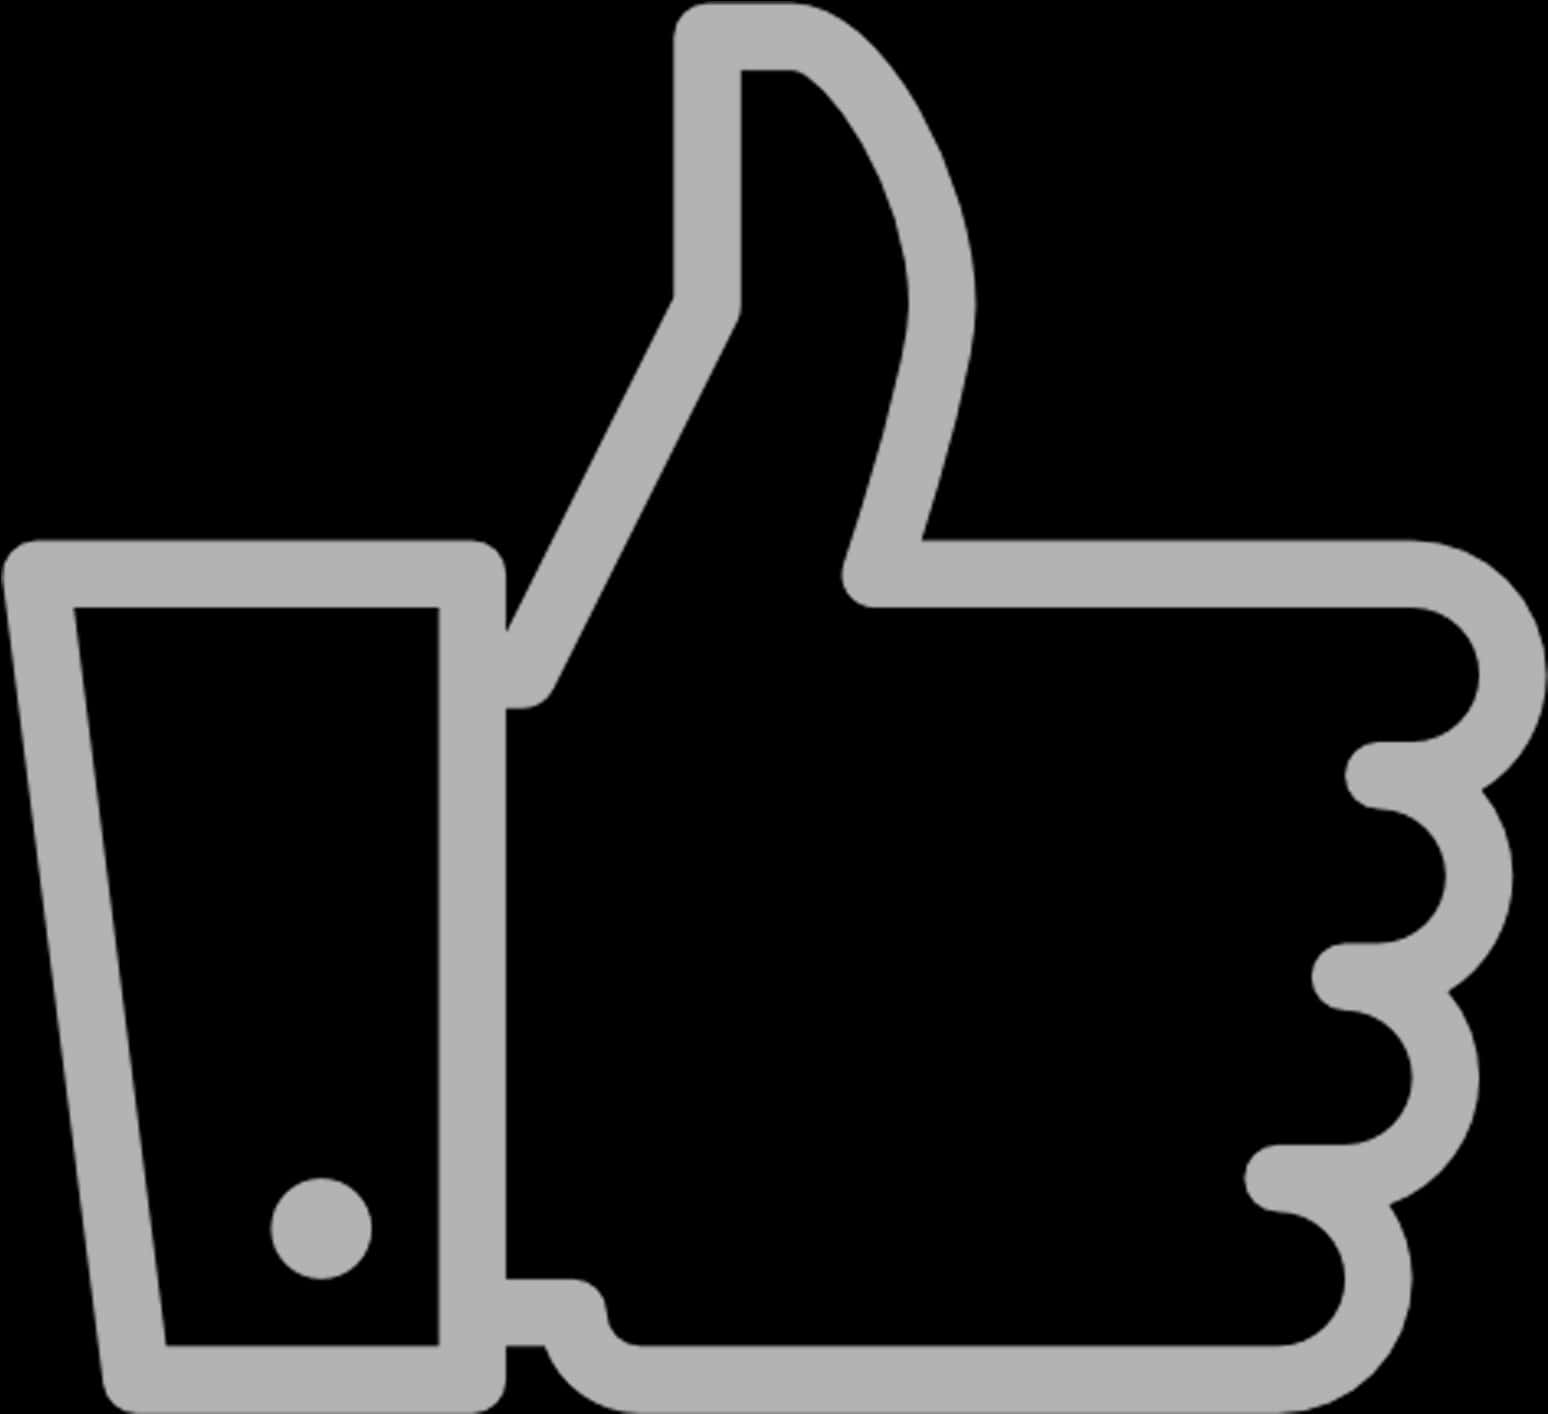 A Thumb Up Symbol With A Black Background